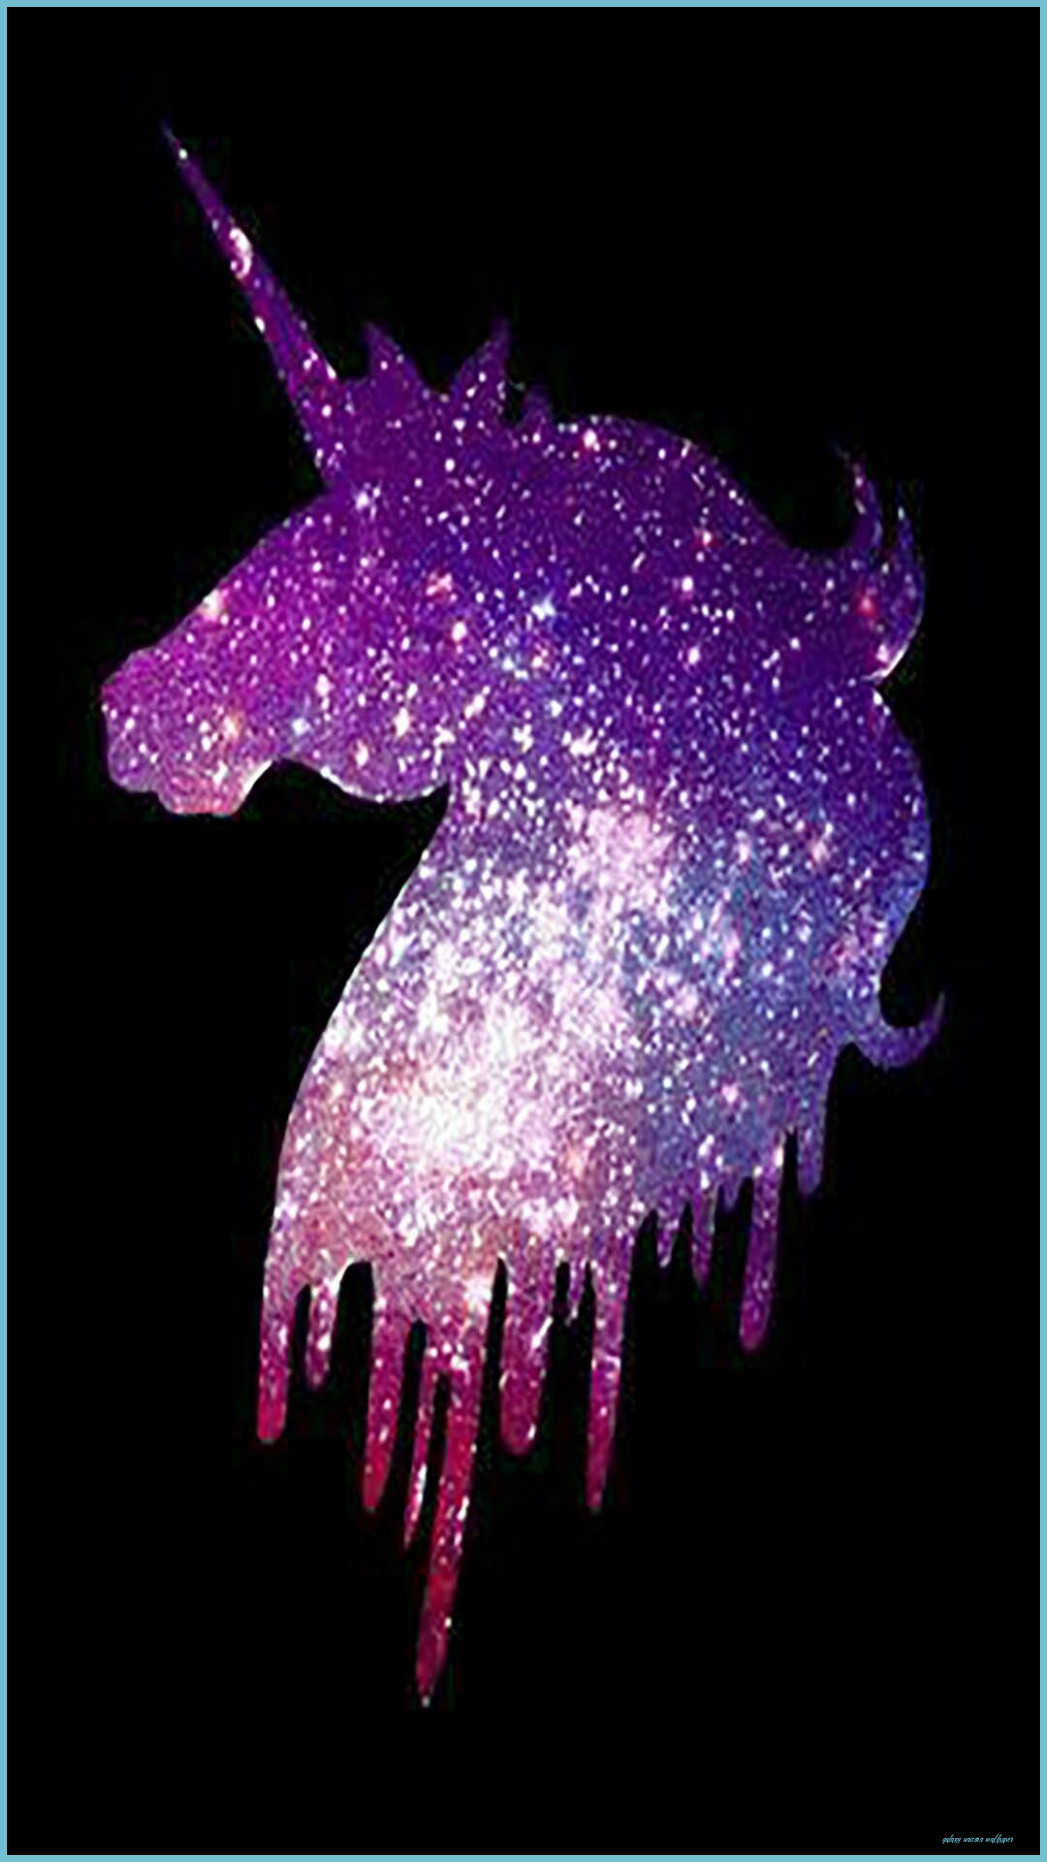 Doubts You Should Clarify About Galaxy Unicorn Wallpaper. Galaxy Unicorn Wallpaper